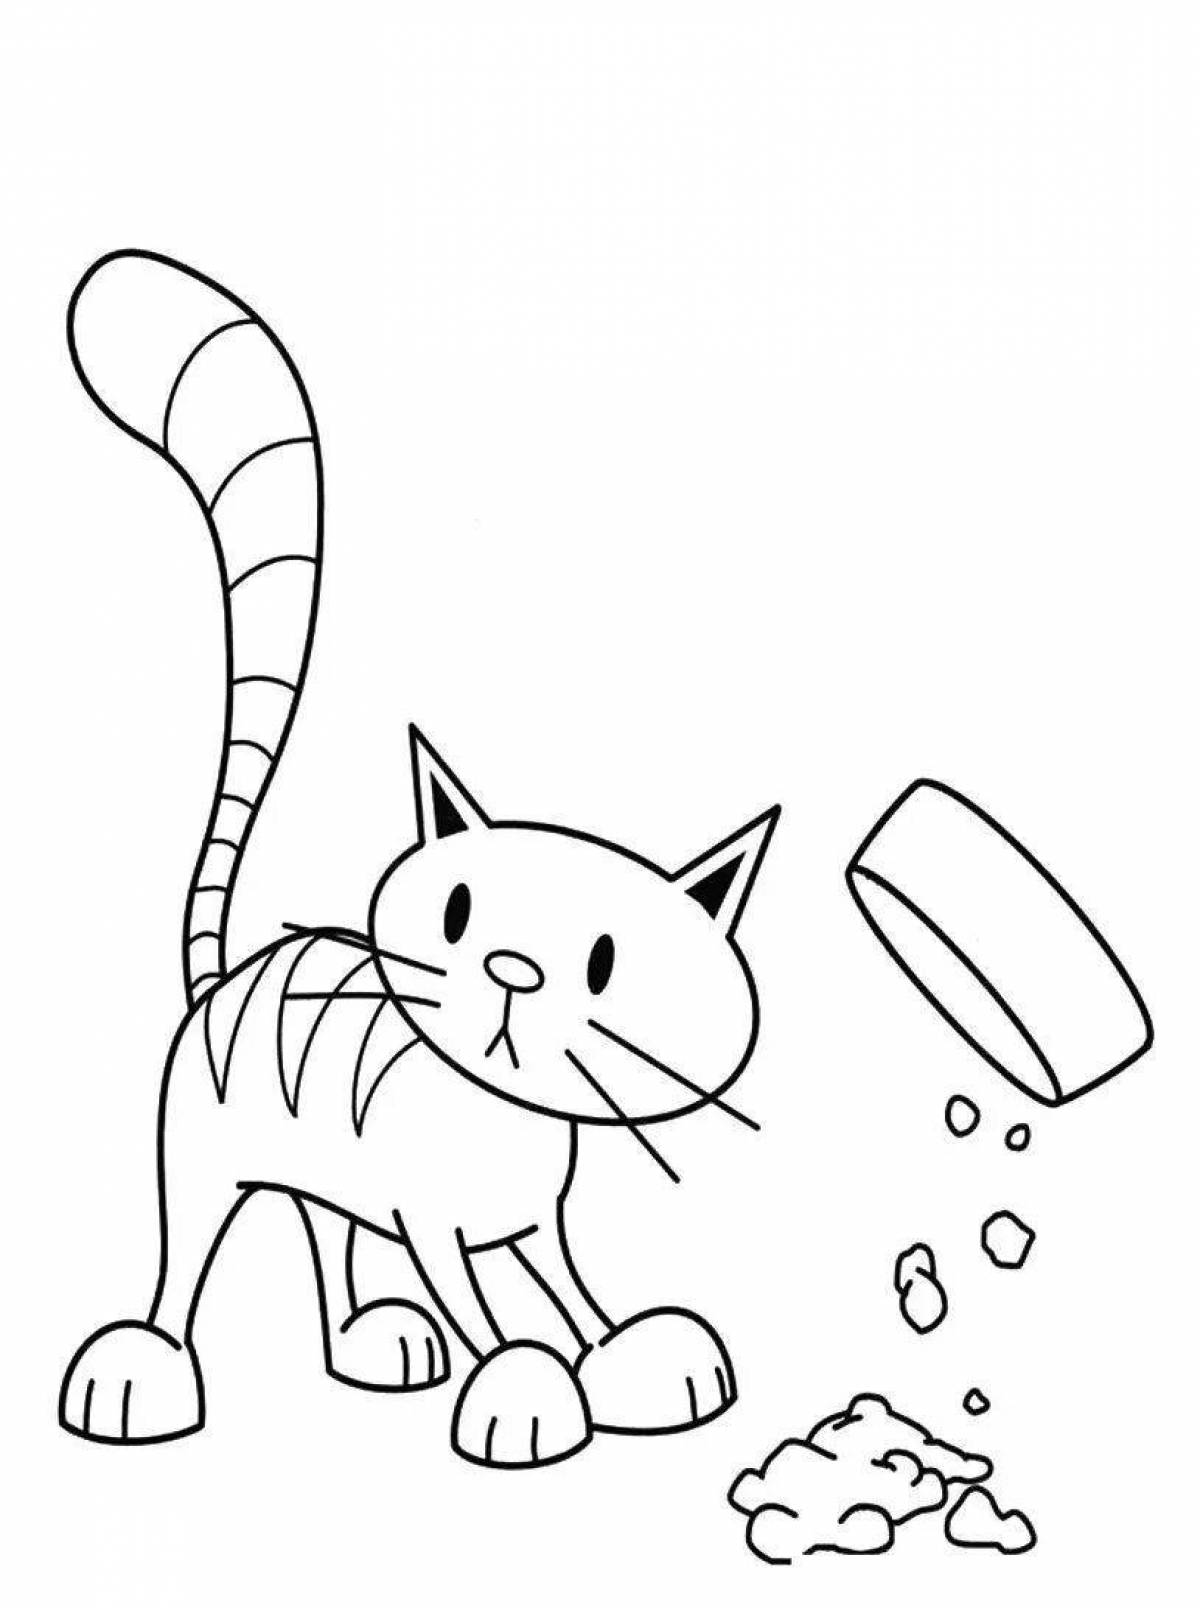 Coloring page cute whiskas cat